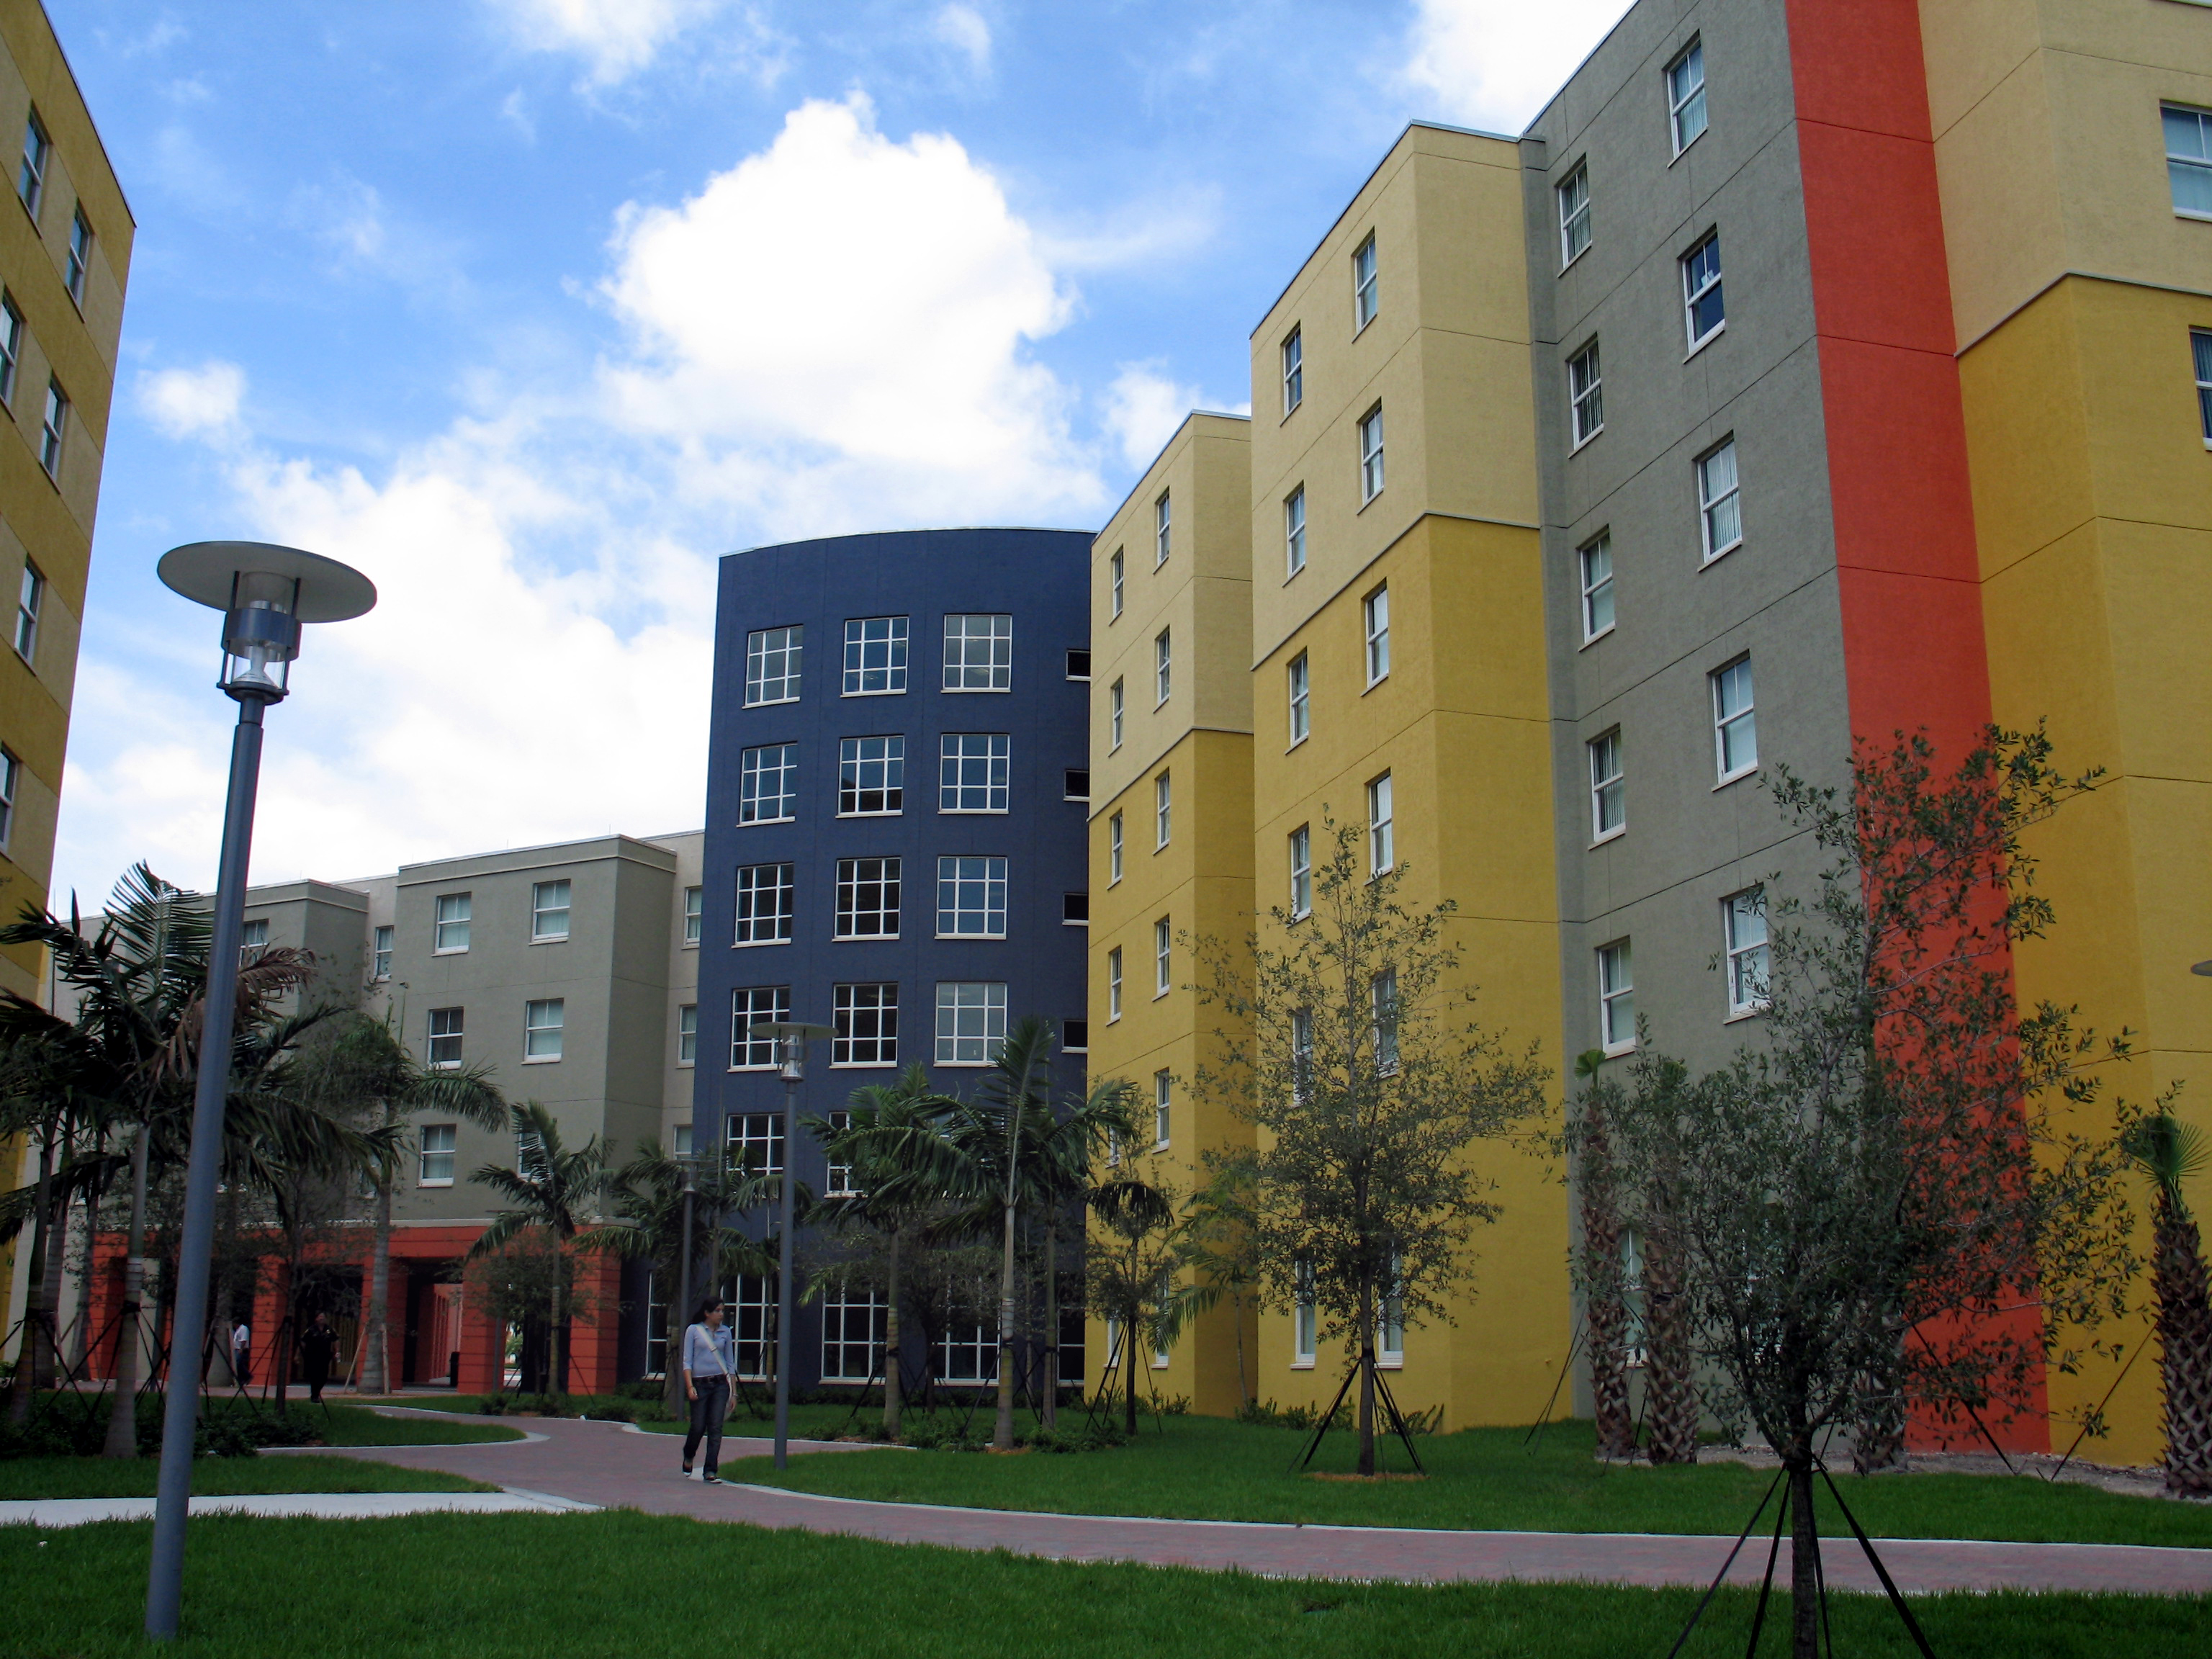 Exterior view of Lakeview housing